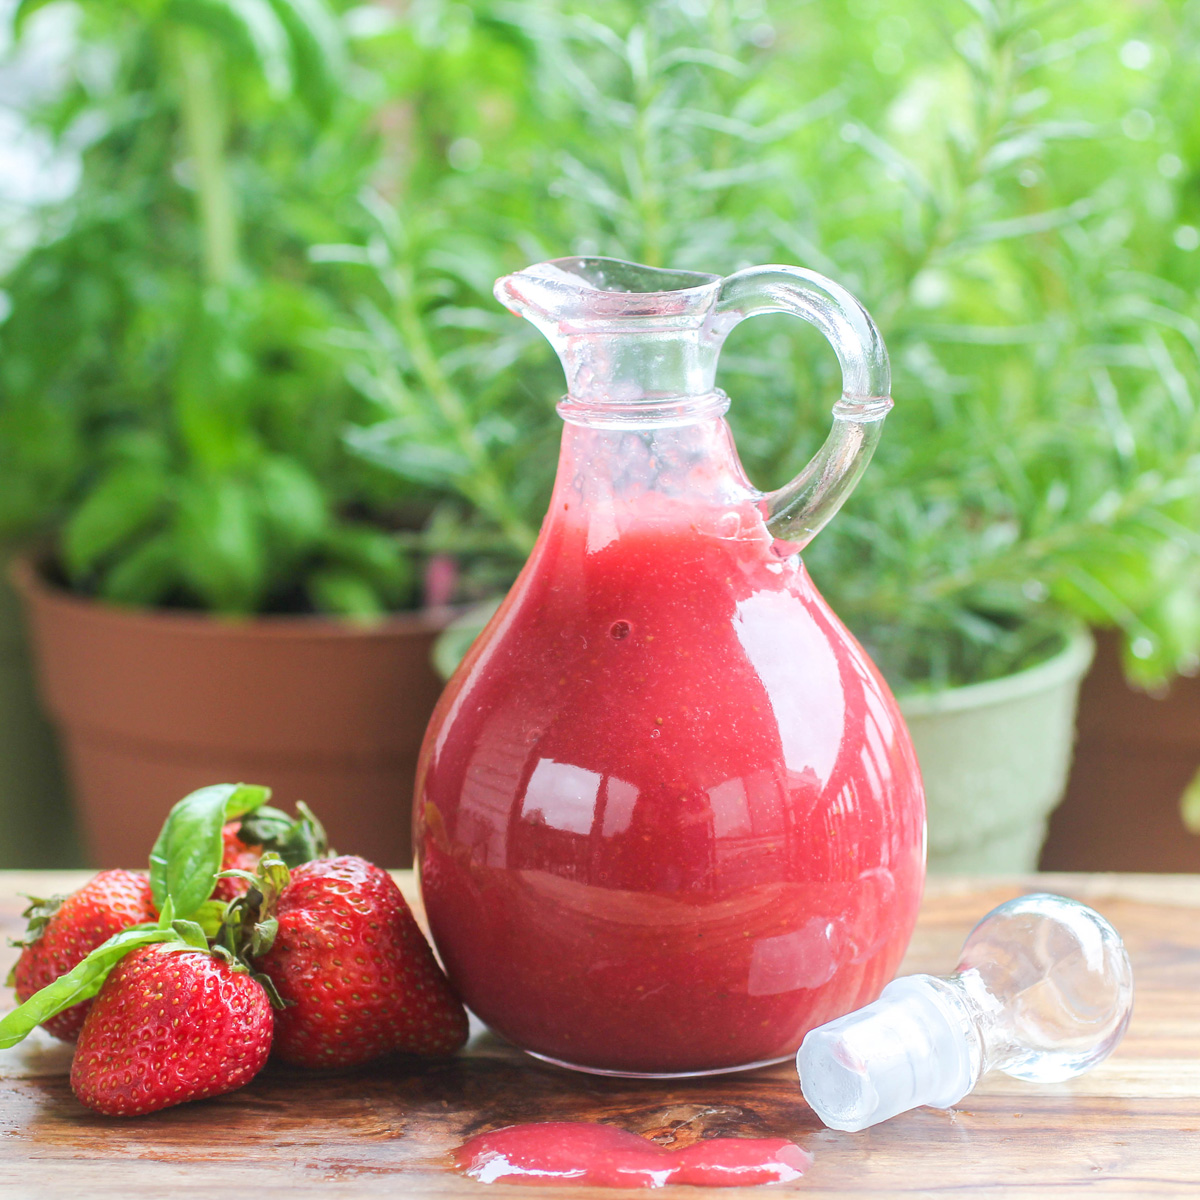 Homemade Strawberry Basil Syrup in a glass syrup jar